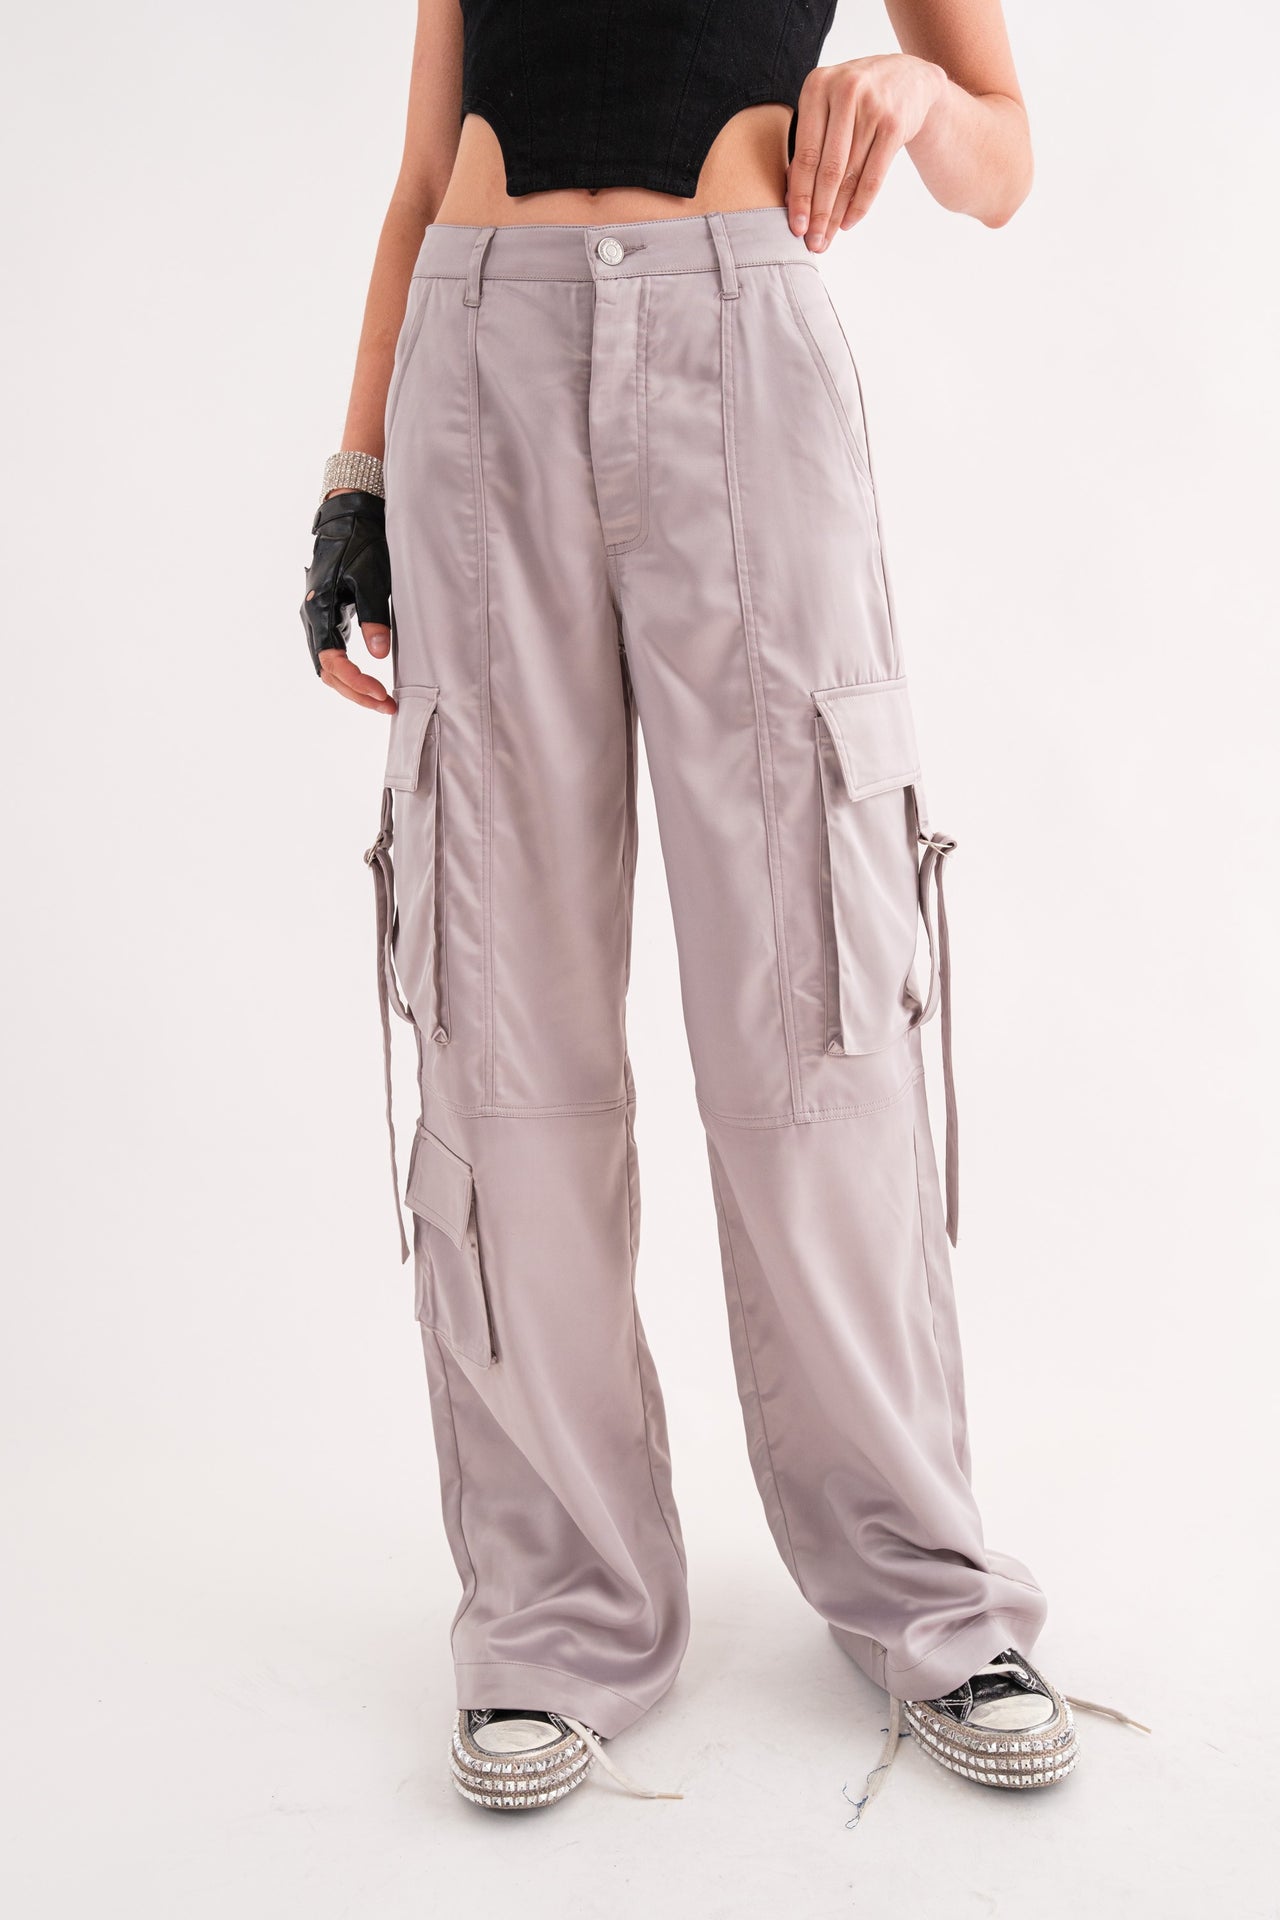 Cargo Pant With Buckle Strap Pockets Grey, Pant Bottom by Signature 8 | LIT Boutique